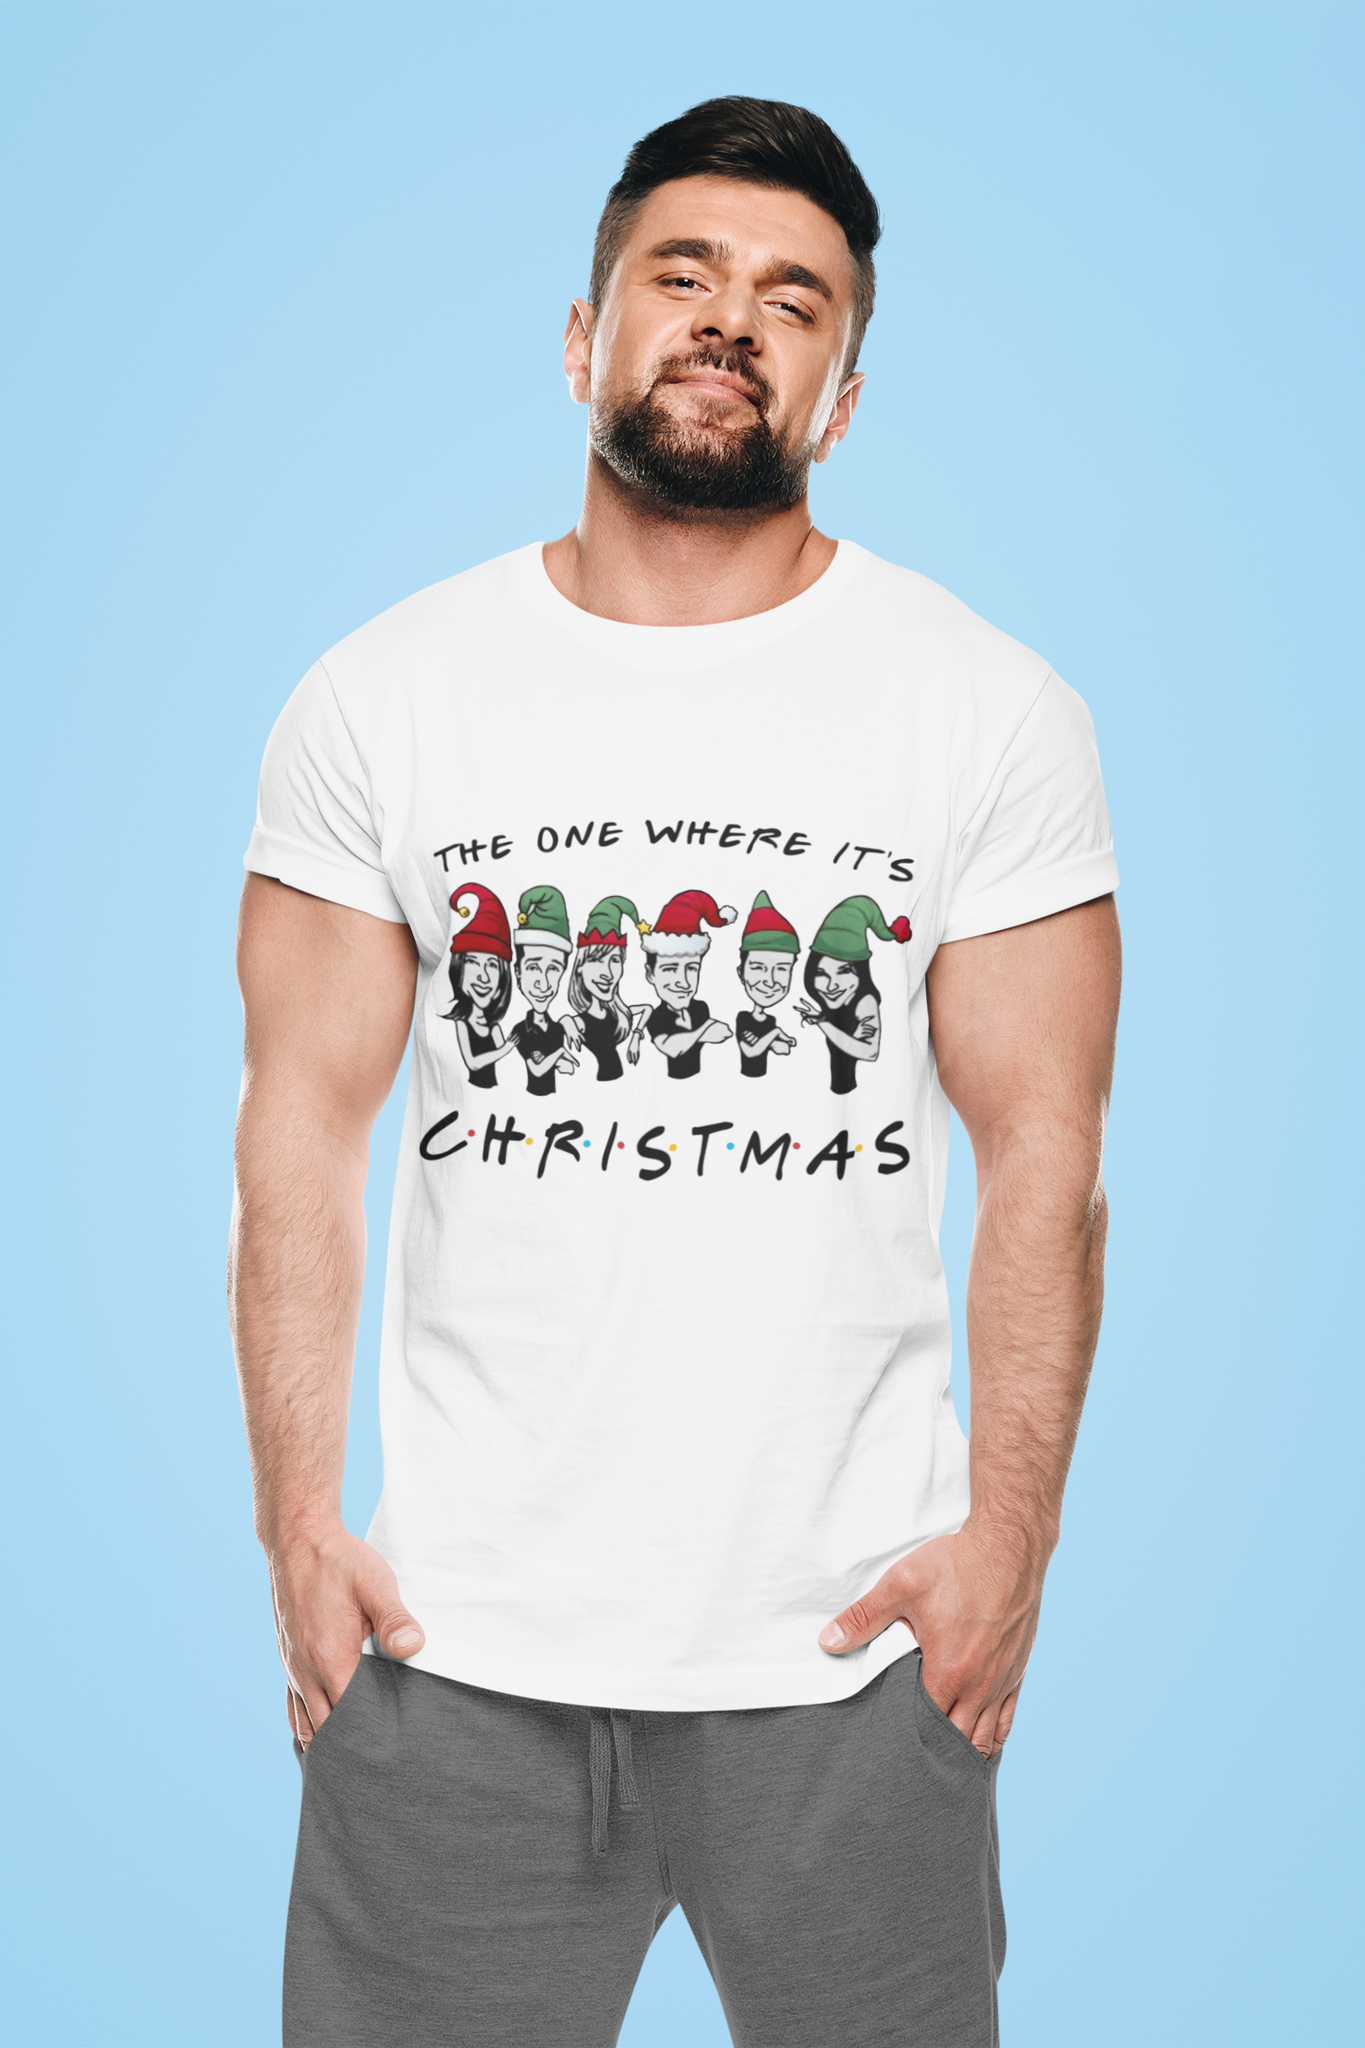 Friends TV Show T Shirt, Friends Characters T Shirt, The One Where Its Christmas Tshirt, Christmas Gifts